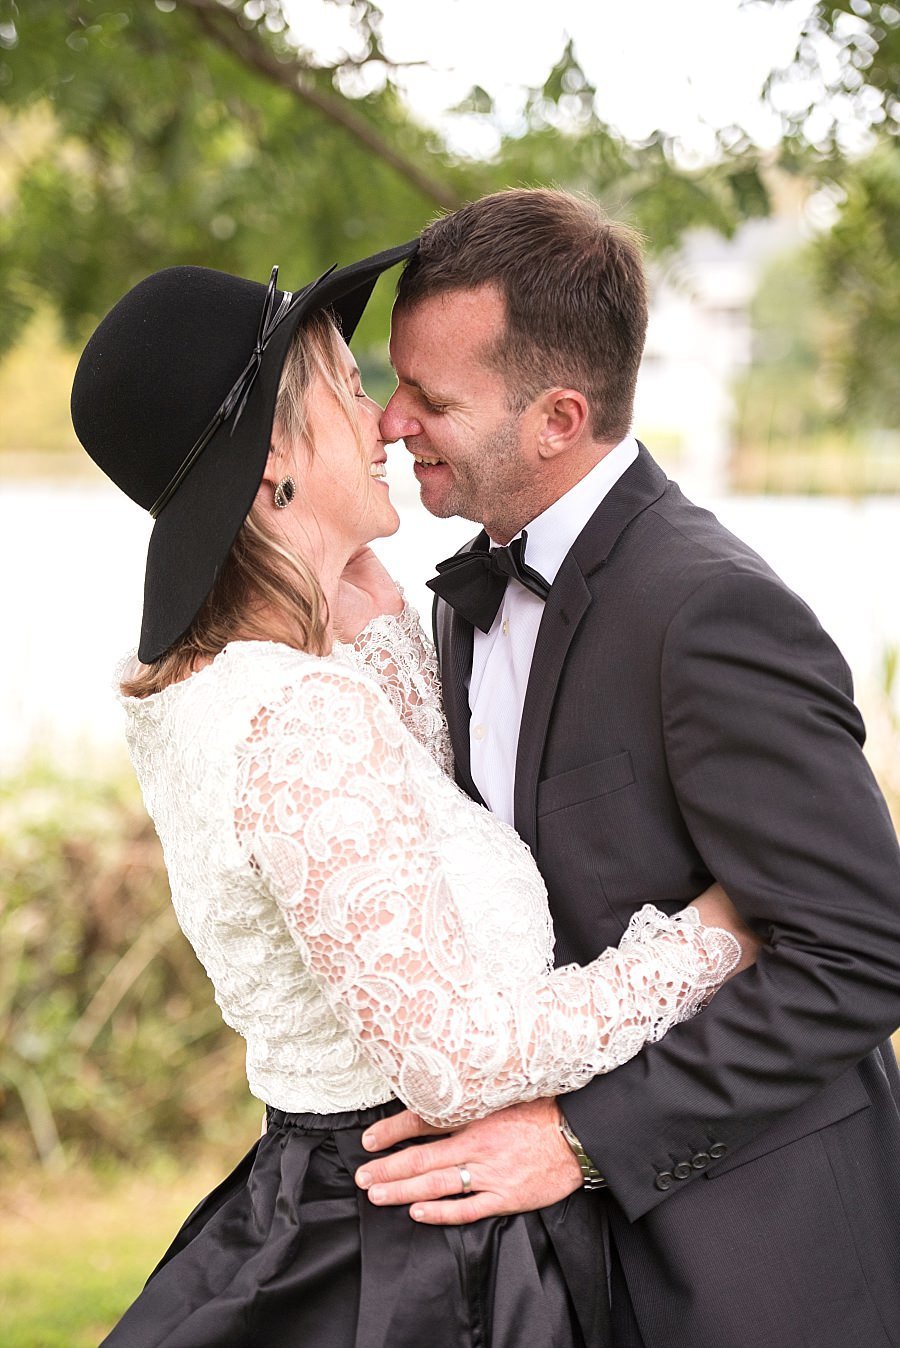 Anniversary vow renewal, close up photo of couple about to share a kiss. She is wearing a black taffeta skirt and she has a long sleeve lace top paired with a black hat.